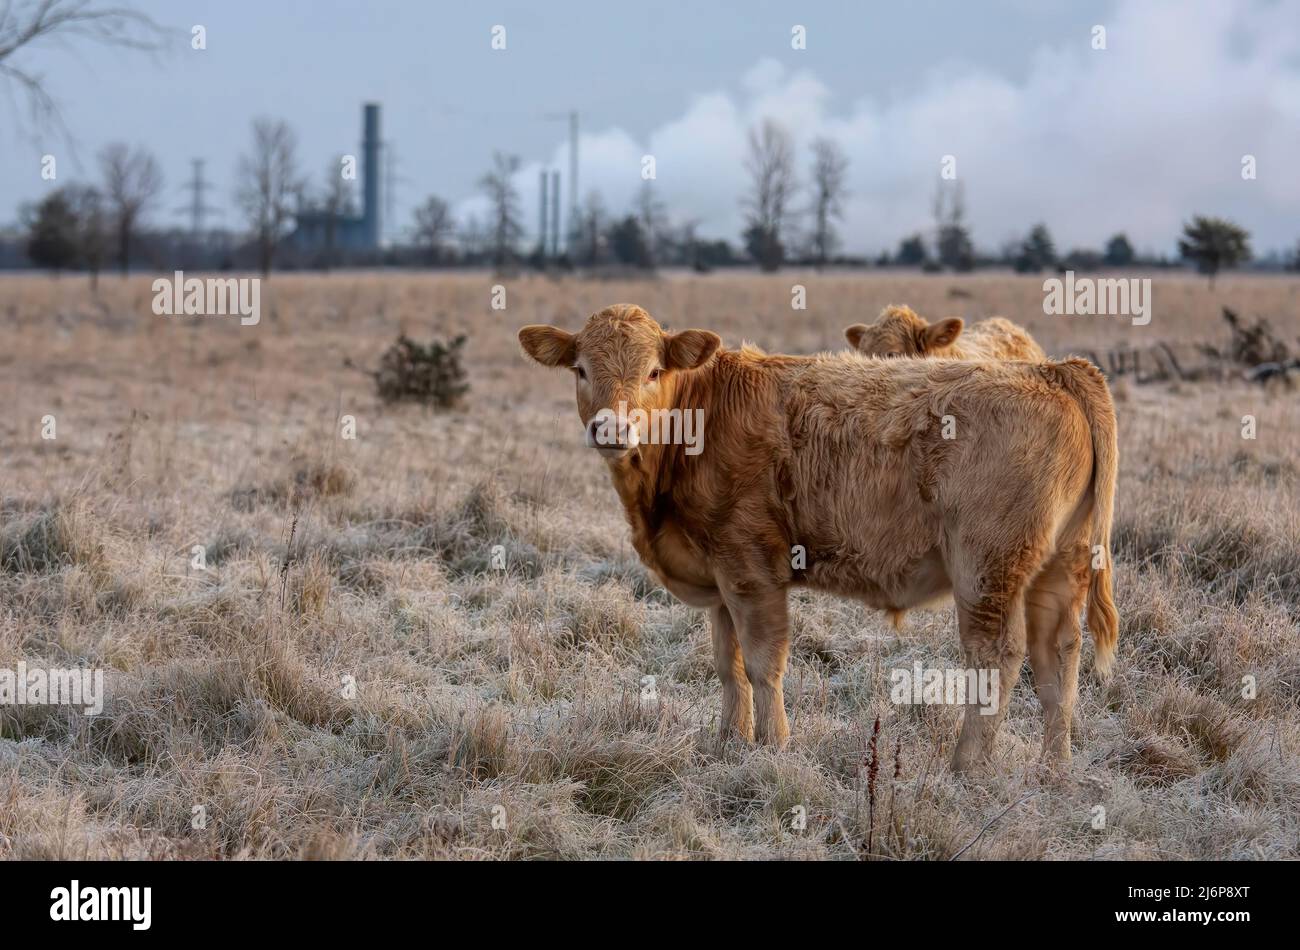 Limousin cattle standing in a farm field on a cold crispy day in Canada Stock Photo